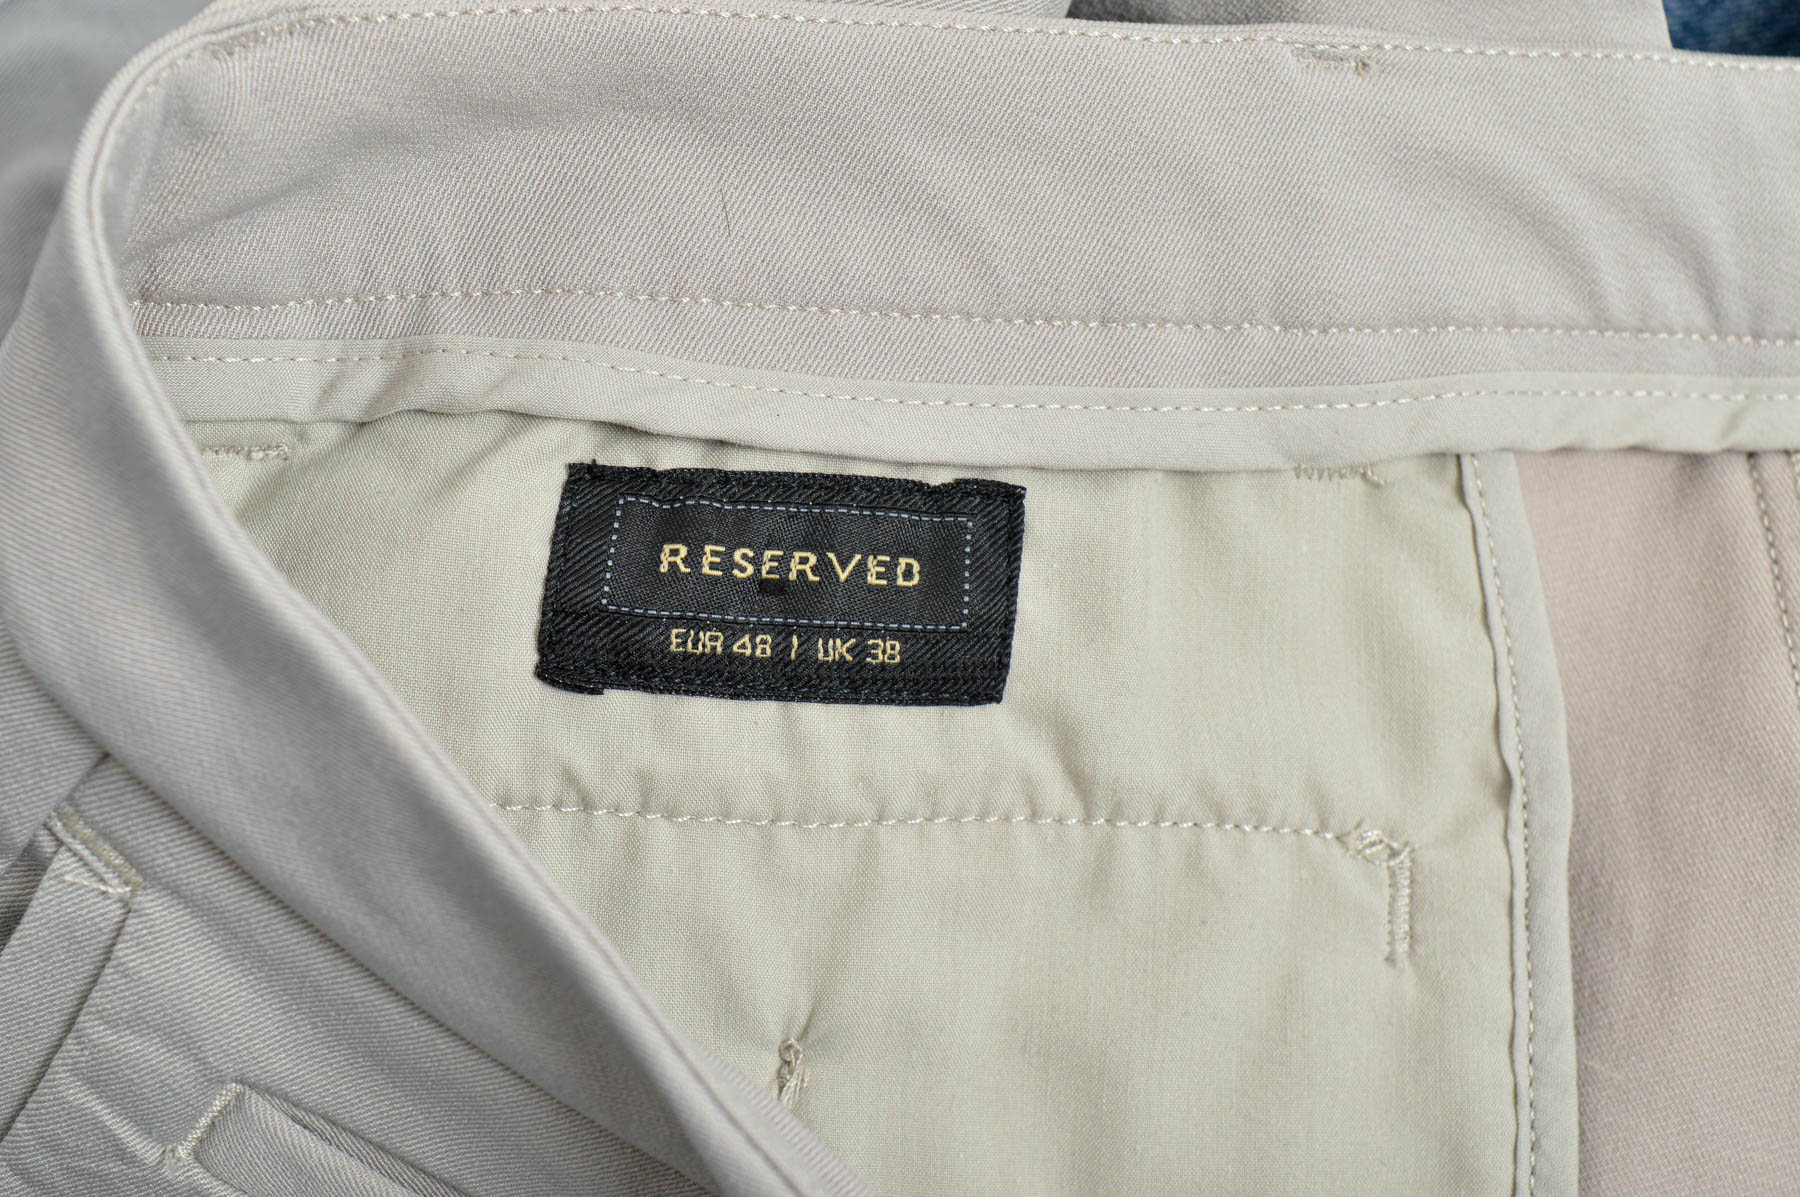 Men's trousers - RESERVED - 2